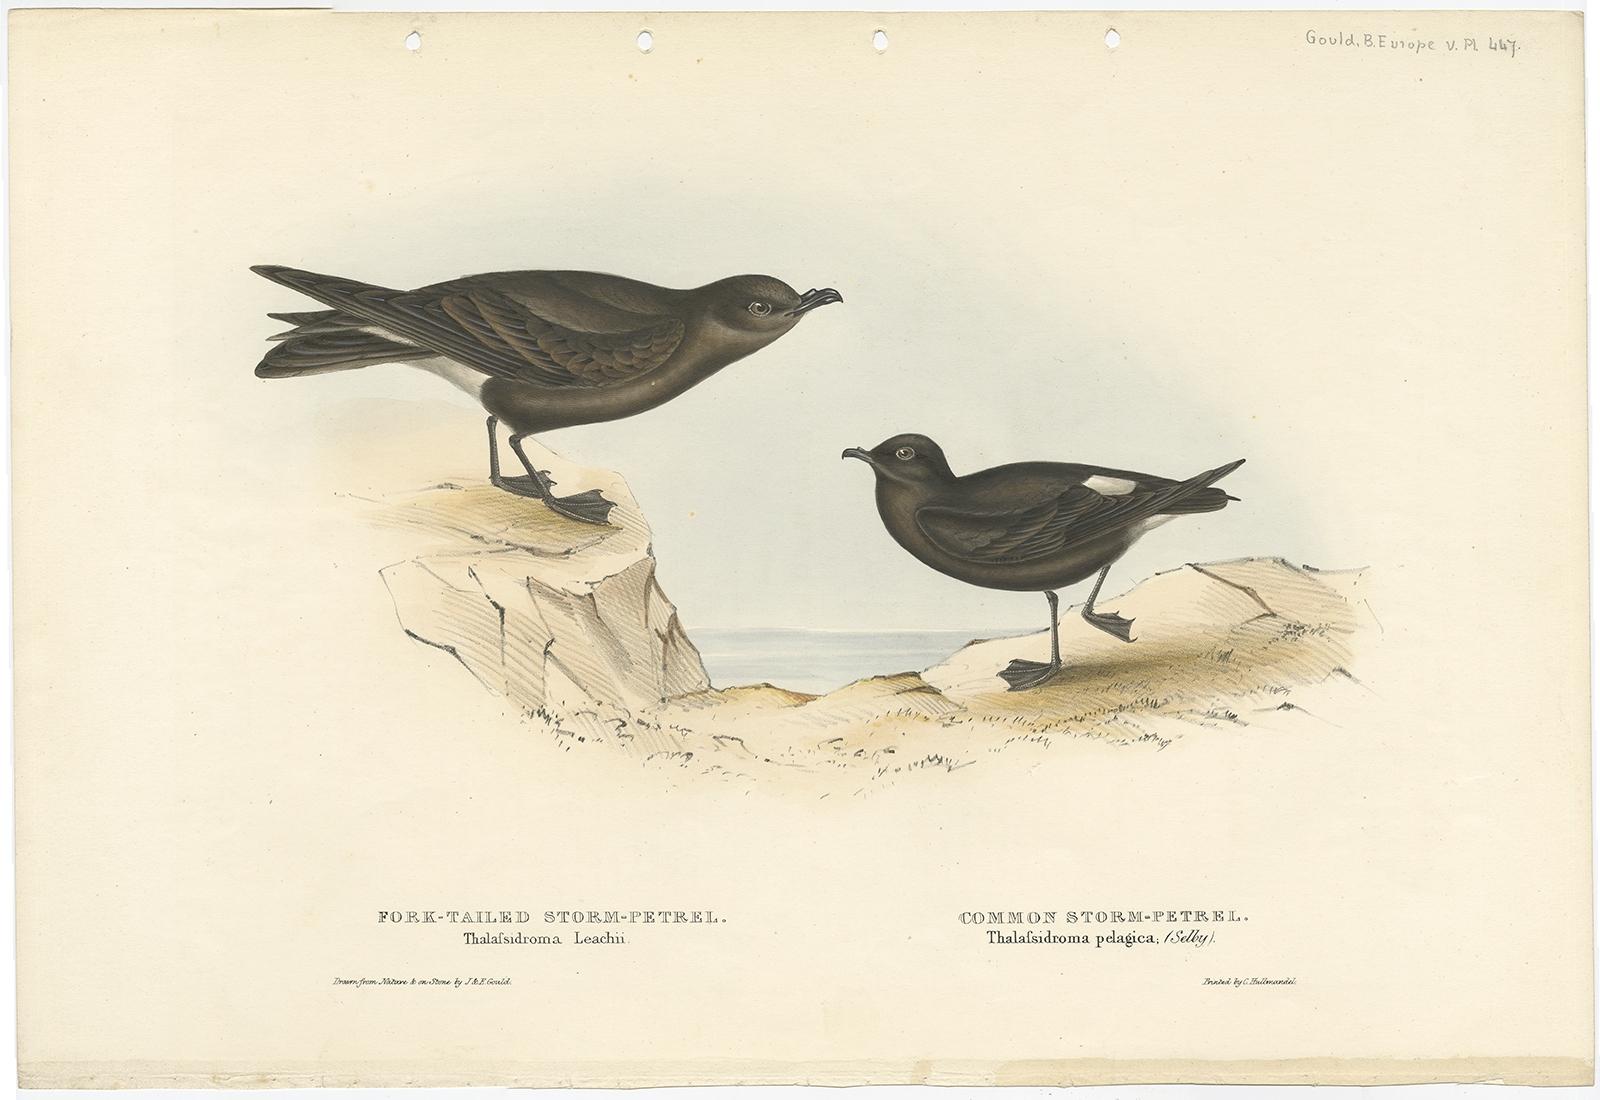 Antique bird print titled 'Fork-Tailed Storm-Petrel & Common Storm-Petrel'. 

Old bird print depicting the Fork-Tailed Storm-Petrel and Common Storm-Petrel. This print originates from 'Birds of Europe' by J. Gould (1832-1837).

Artists and